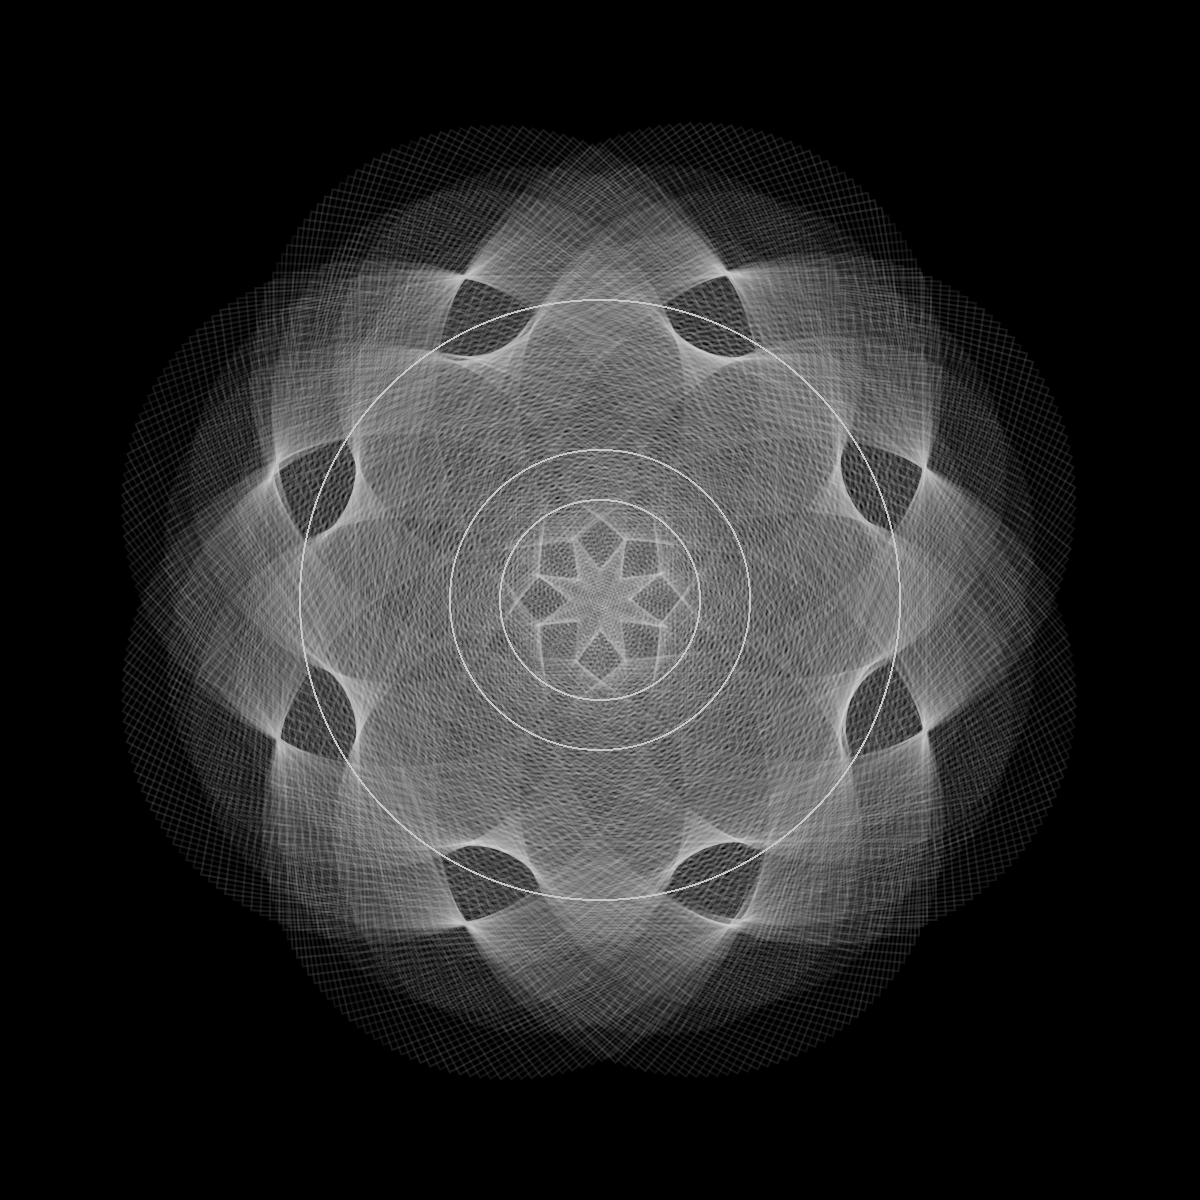 a black and white image with some generated lace patterns